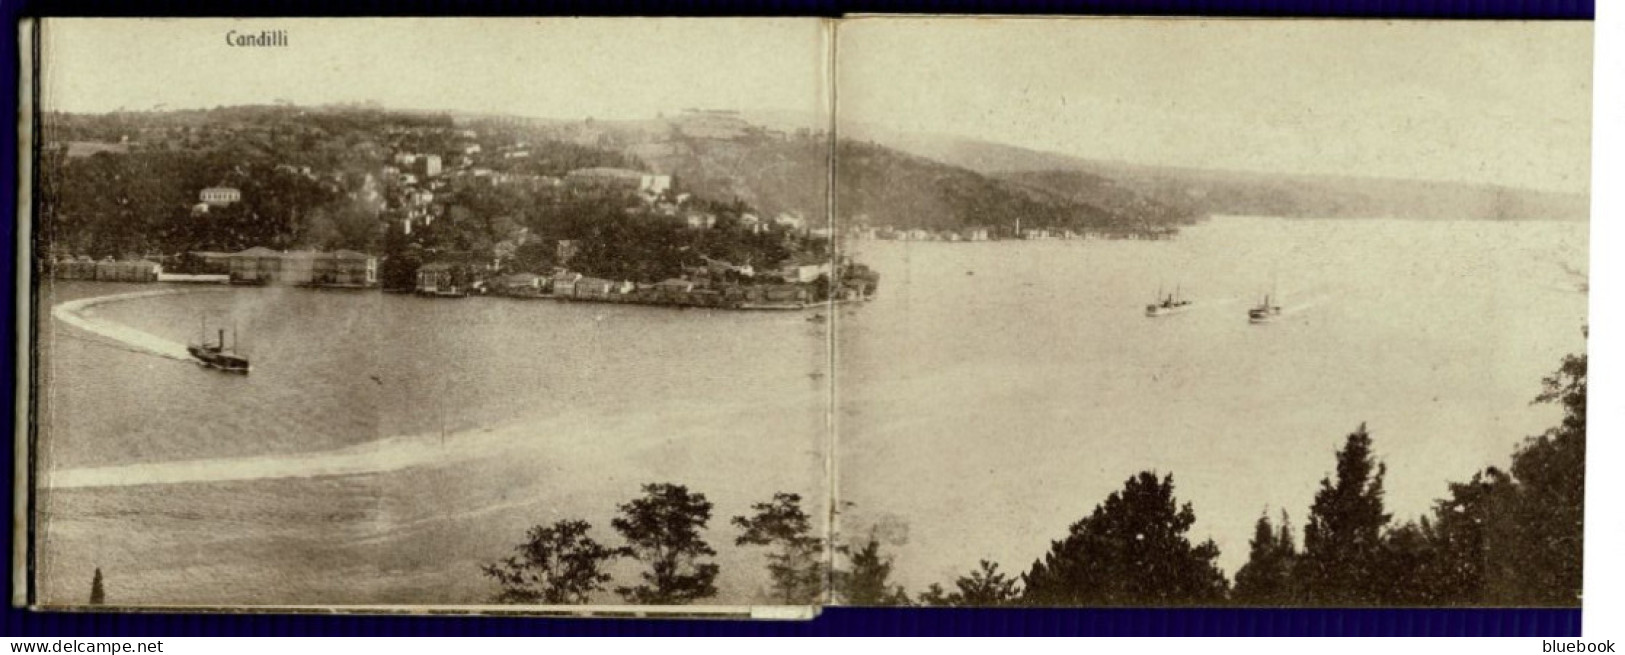 Ref 1647 - Amazing - 7 Part Panoramic View Joined Up Postcard Of The Bosphorous - Turkey - Turkey